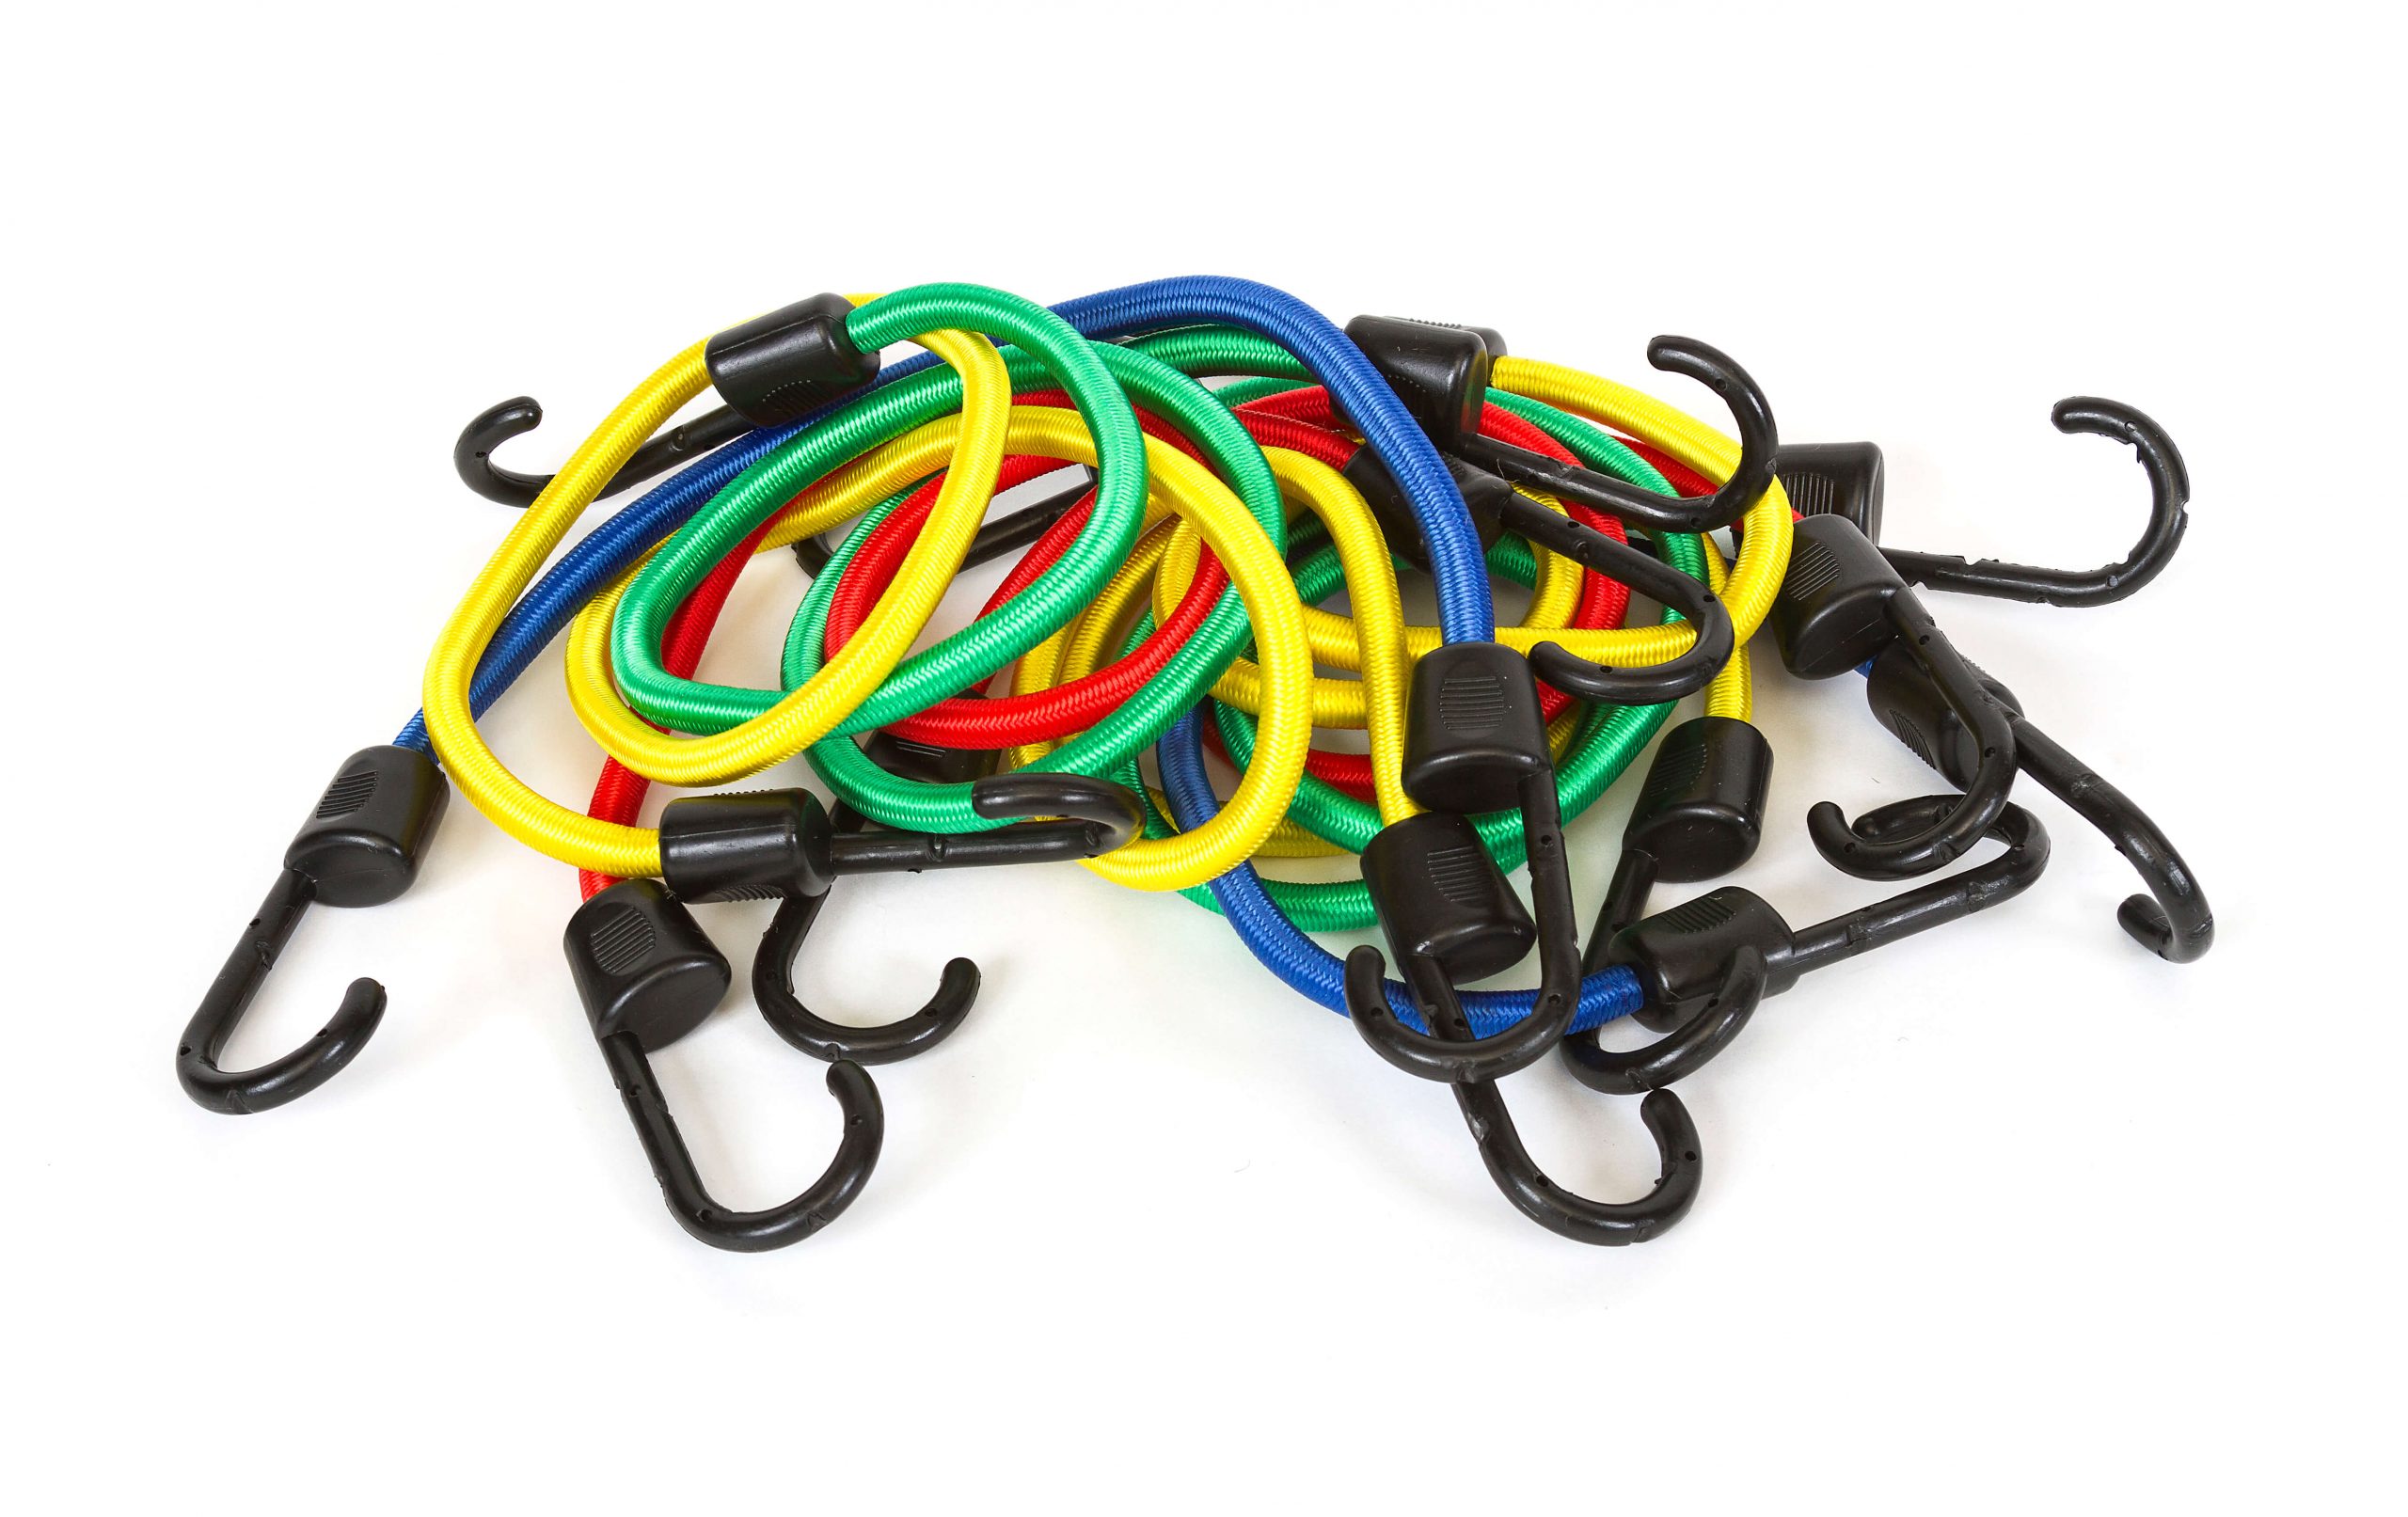 Pile of red, blue, yellow and green bungee cords